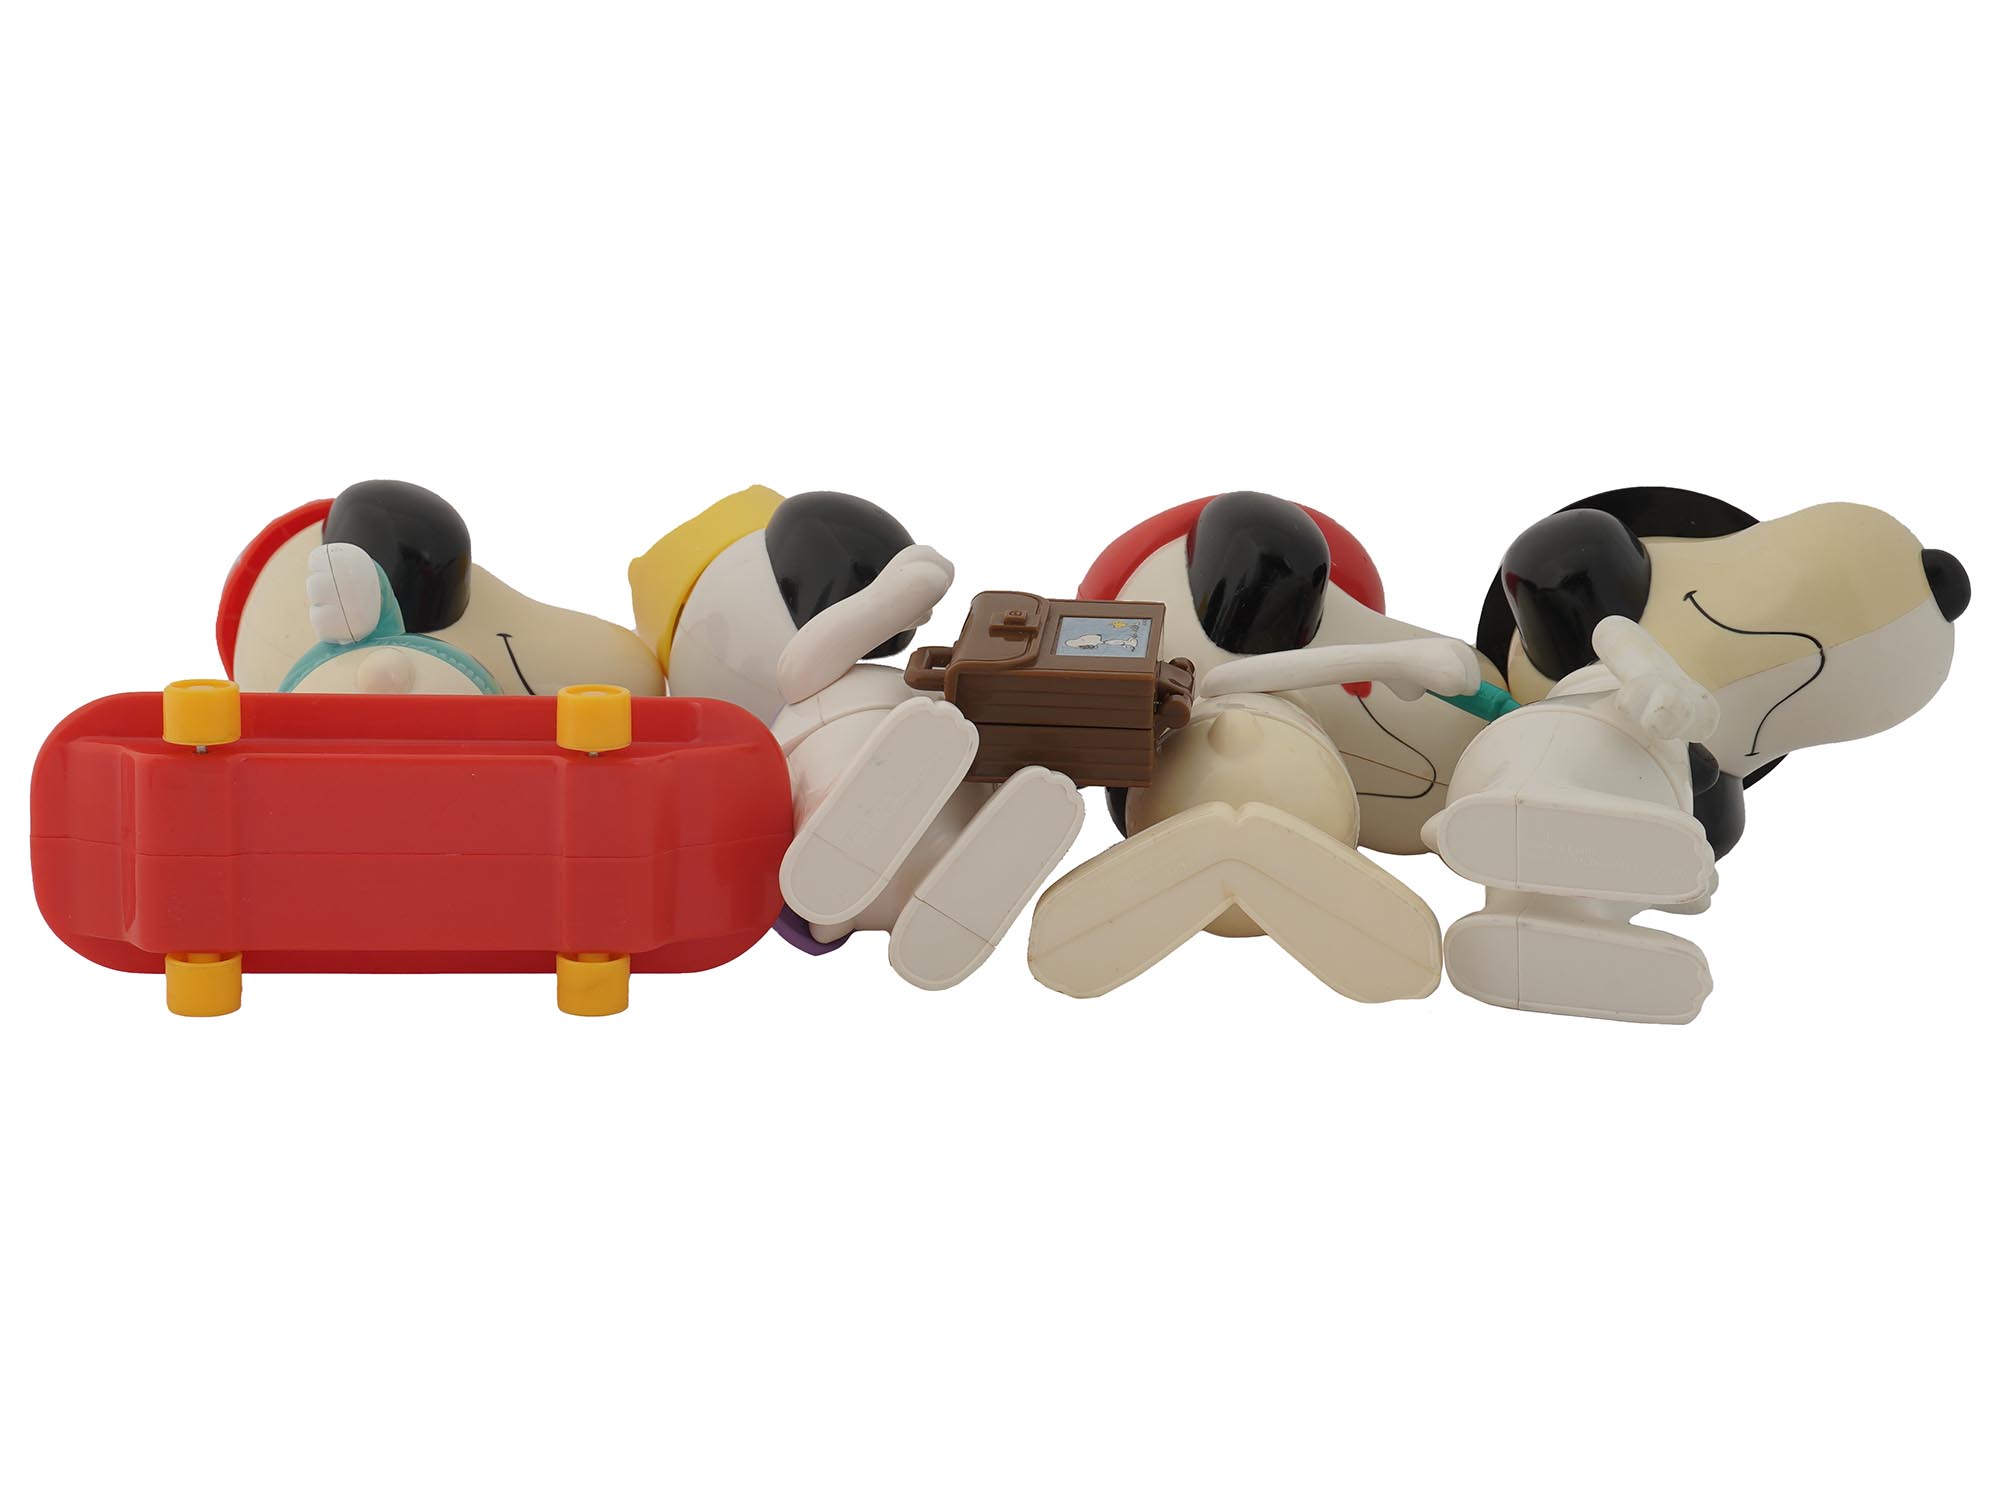 2000 FOUR SNOOPY MCDONALDS HAPPY MEAL FIGURINES PIC-2